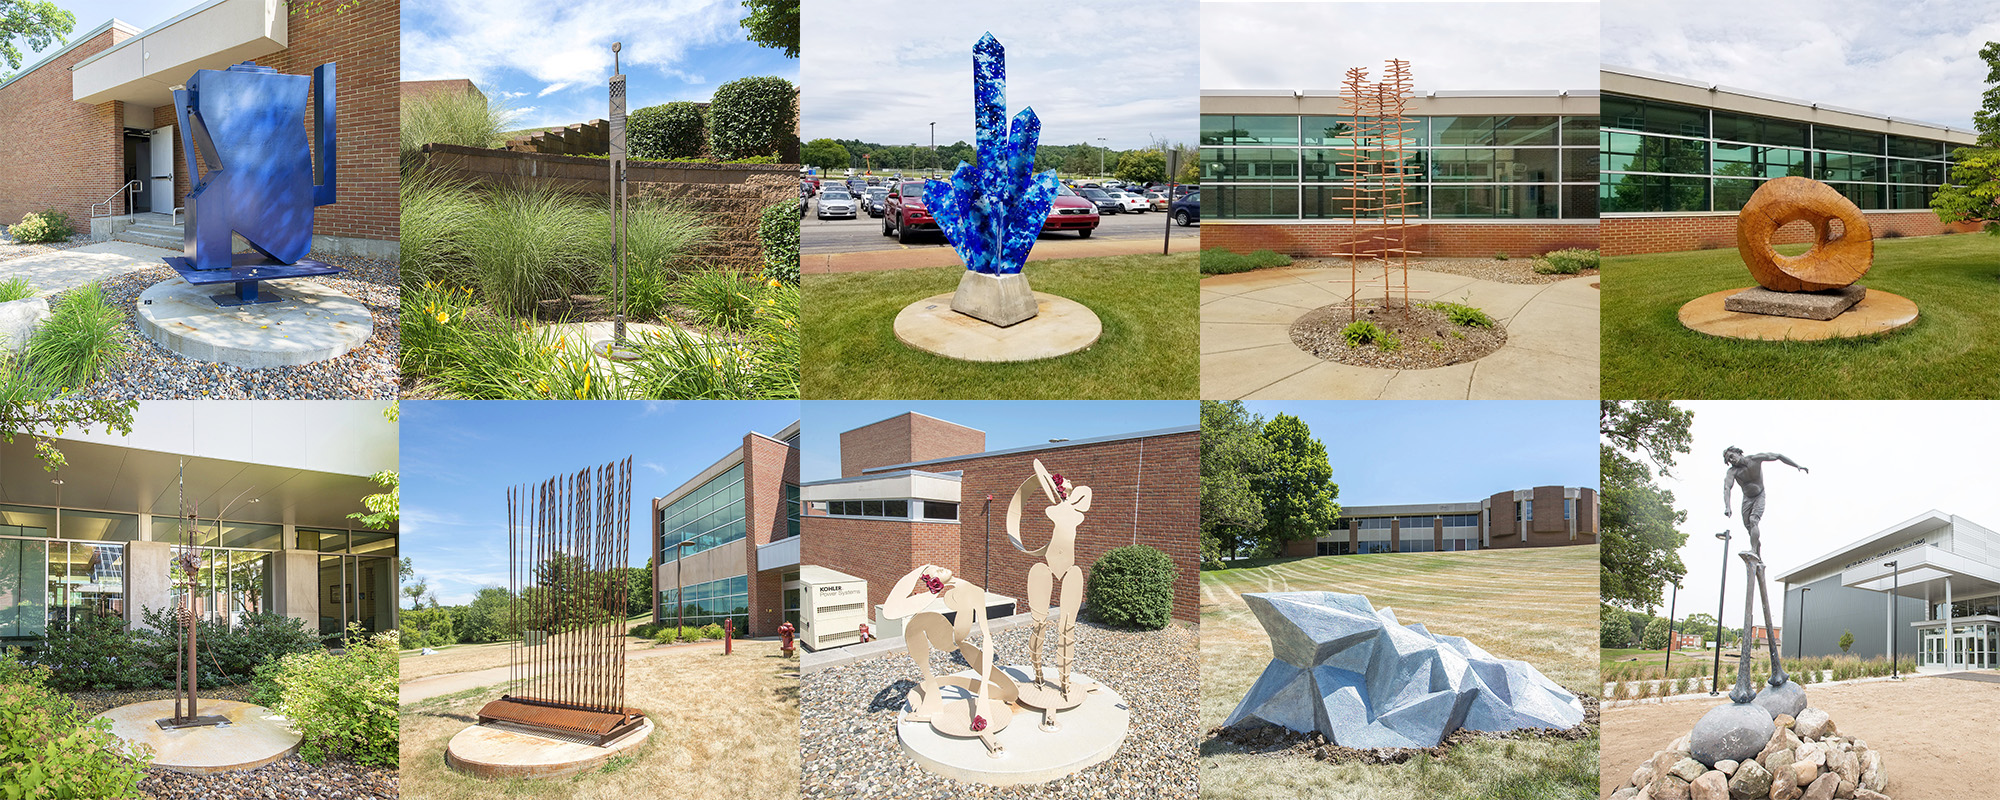 A collage of the 10 new outdoor sculptures installed on KCC's North Avenue campus over the Summer 2018 semester.